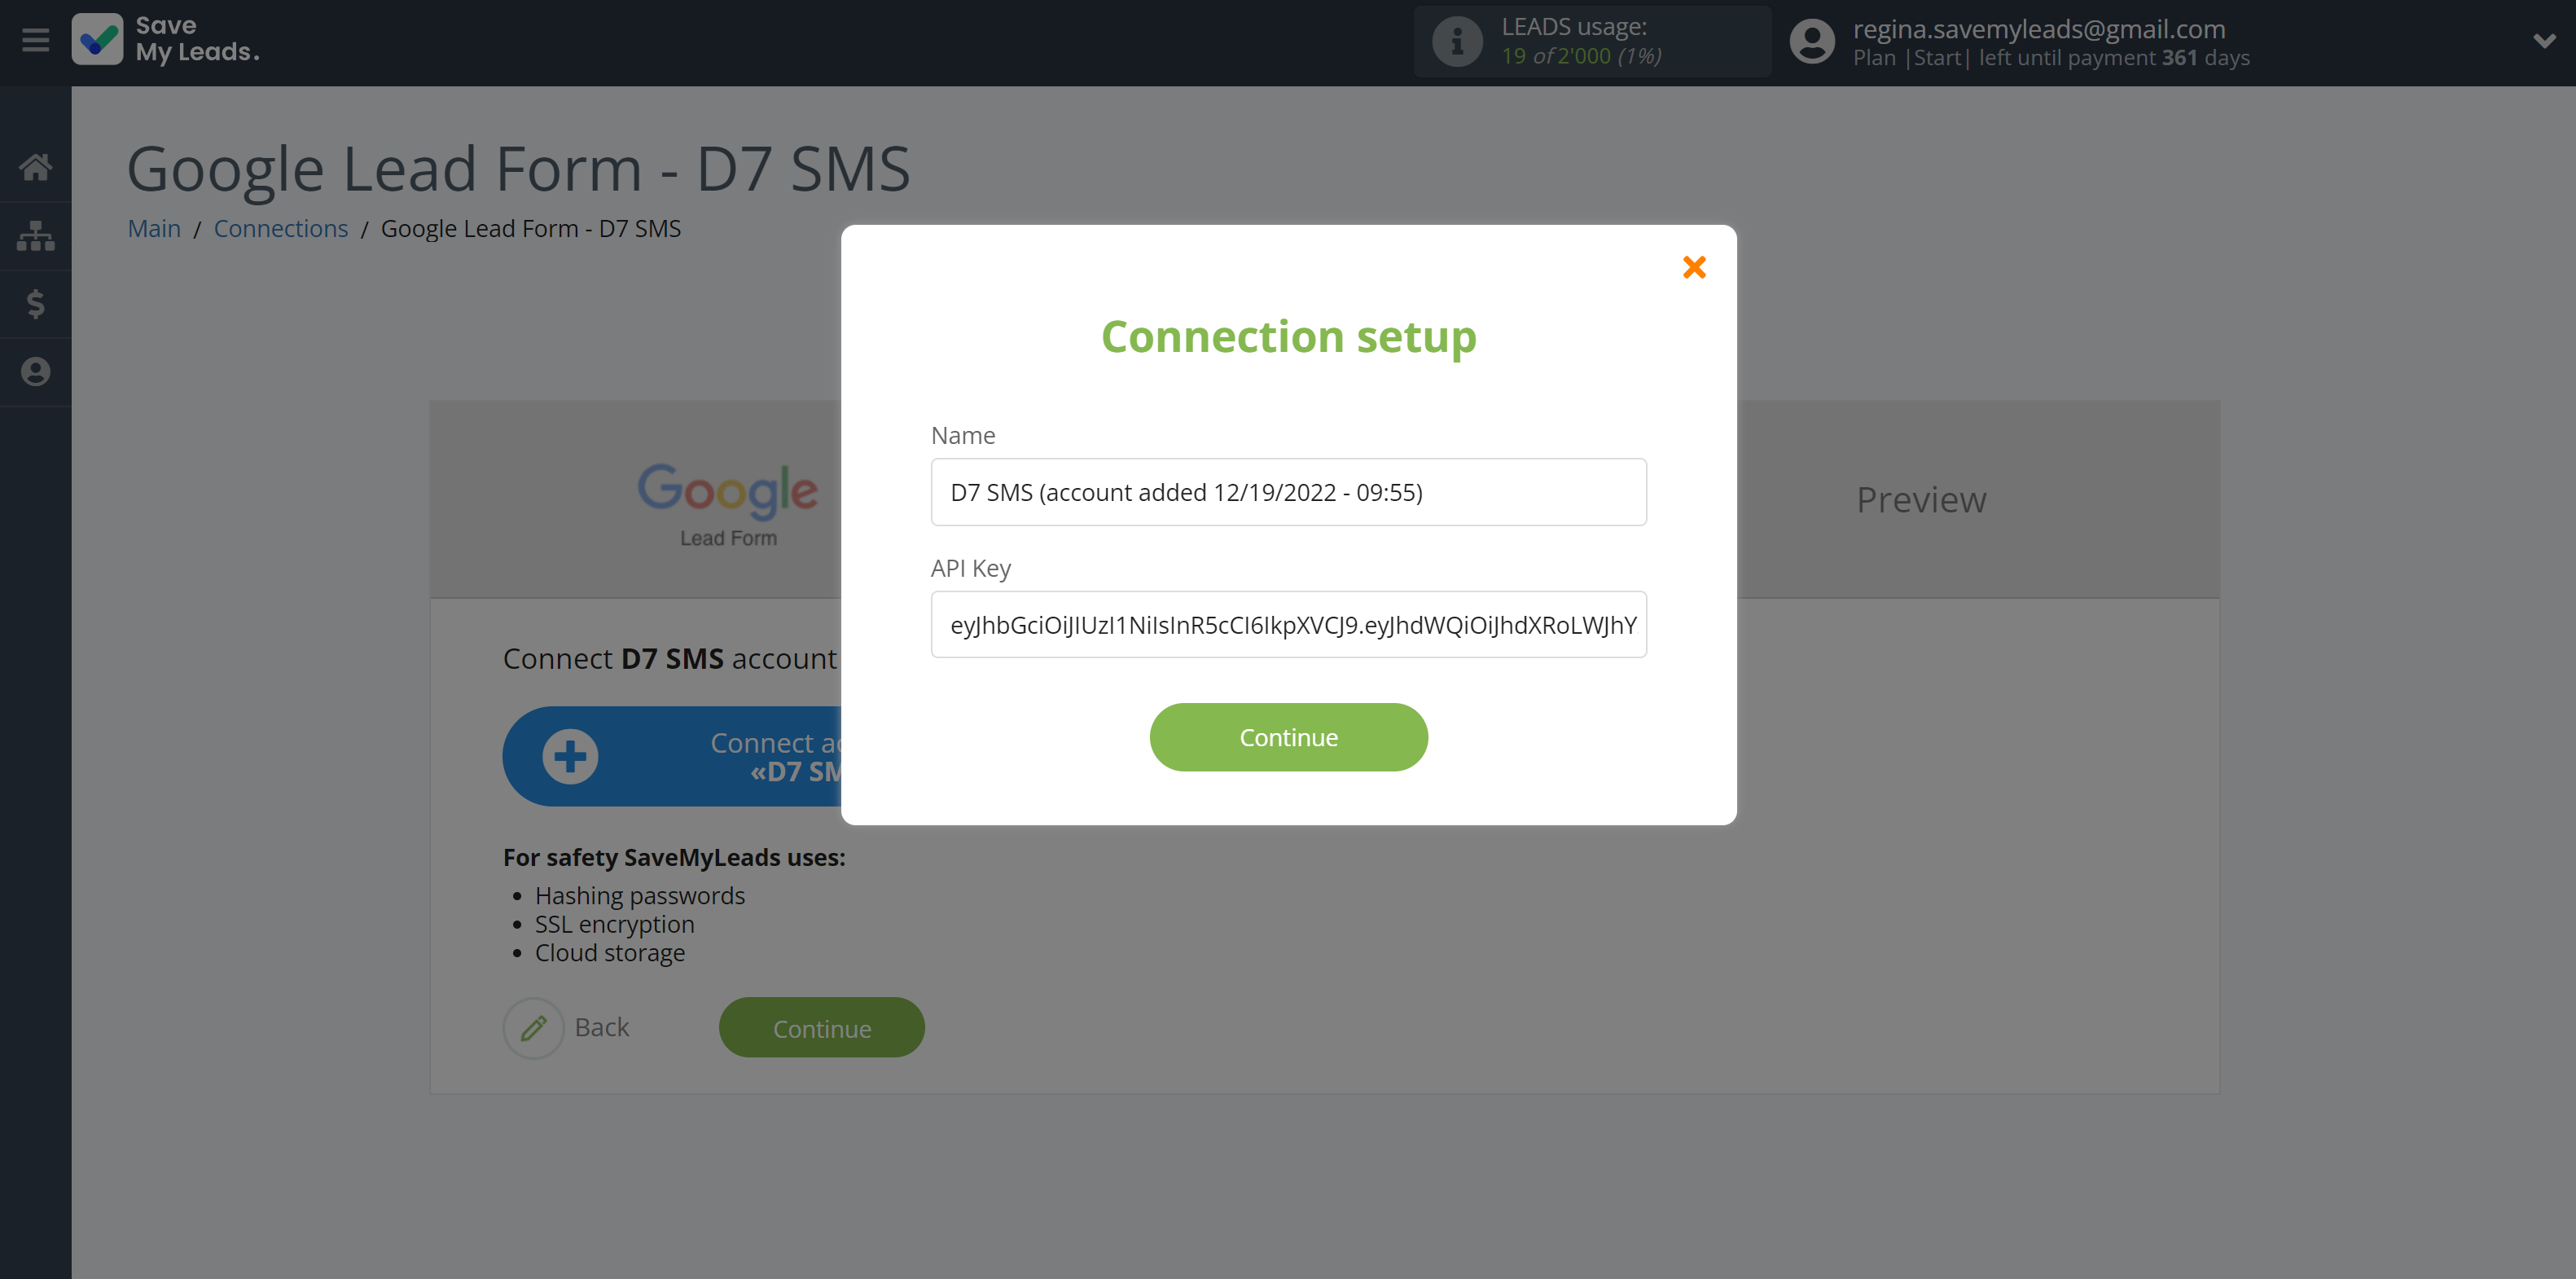 How to Connect Google Lead Form with D7 SMS | Data Destination account connection